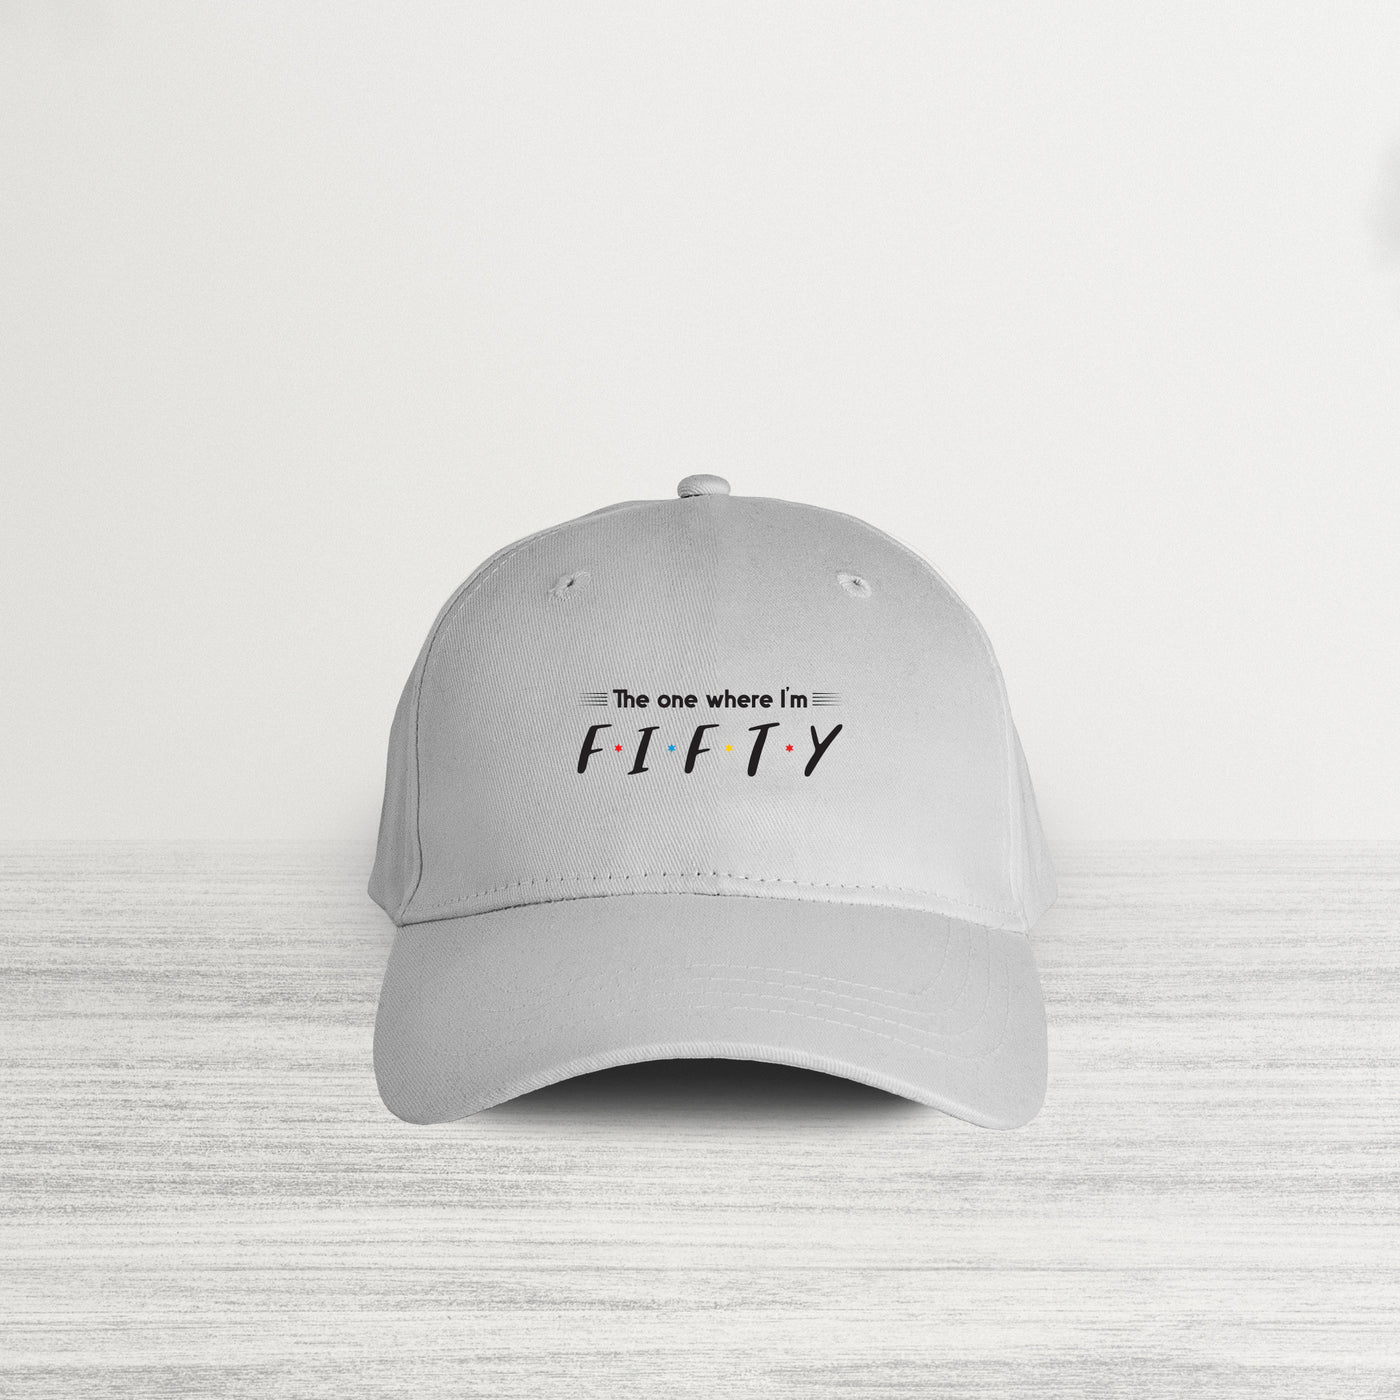 The One Where I'm Fifty HAT